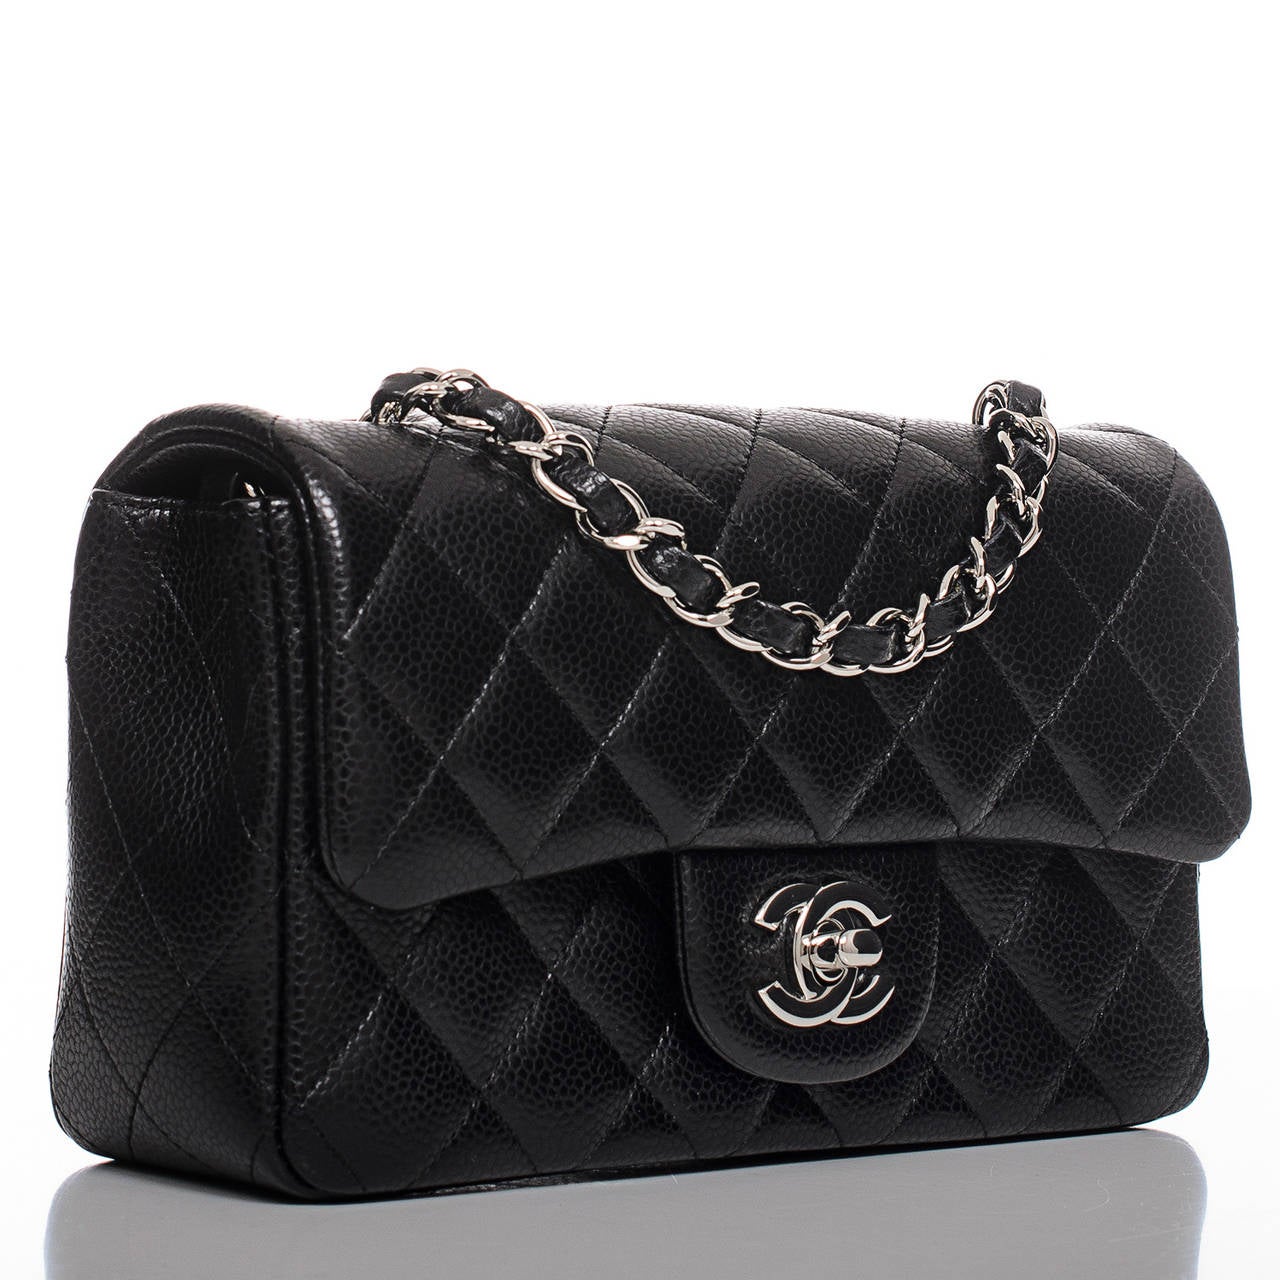 Chanel black Small Classic 2.55 flap bag in quilted caviar leather with silver tone hardware.

Named 2.55 to honor the bag's creation in February 1955, the iconic Chanel bag was a modification of the bag Coco Chanel originally designed in 1929.